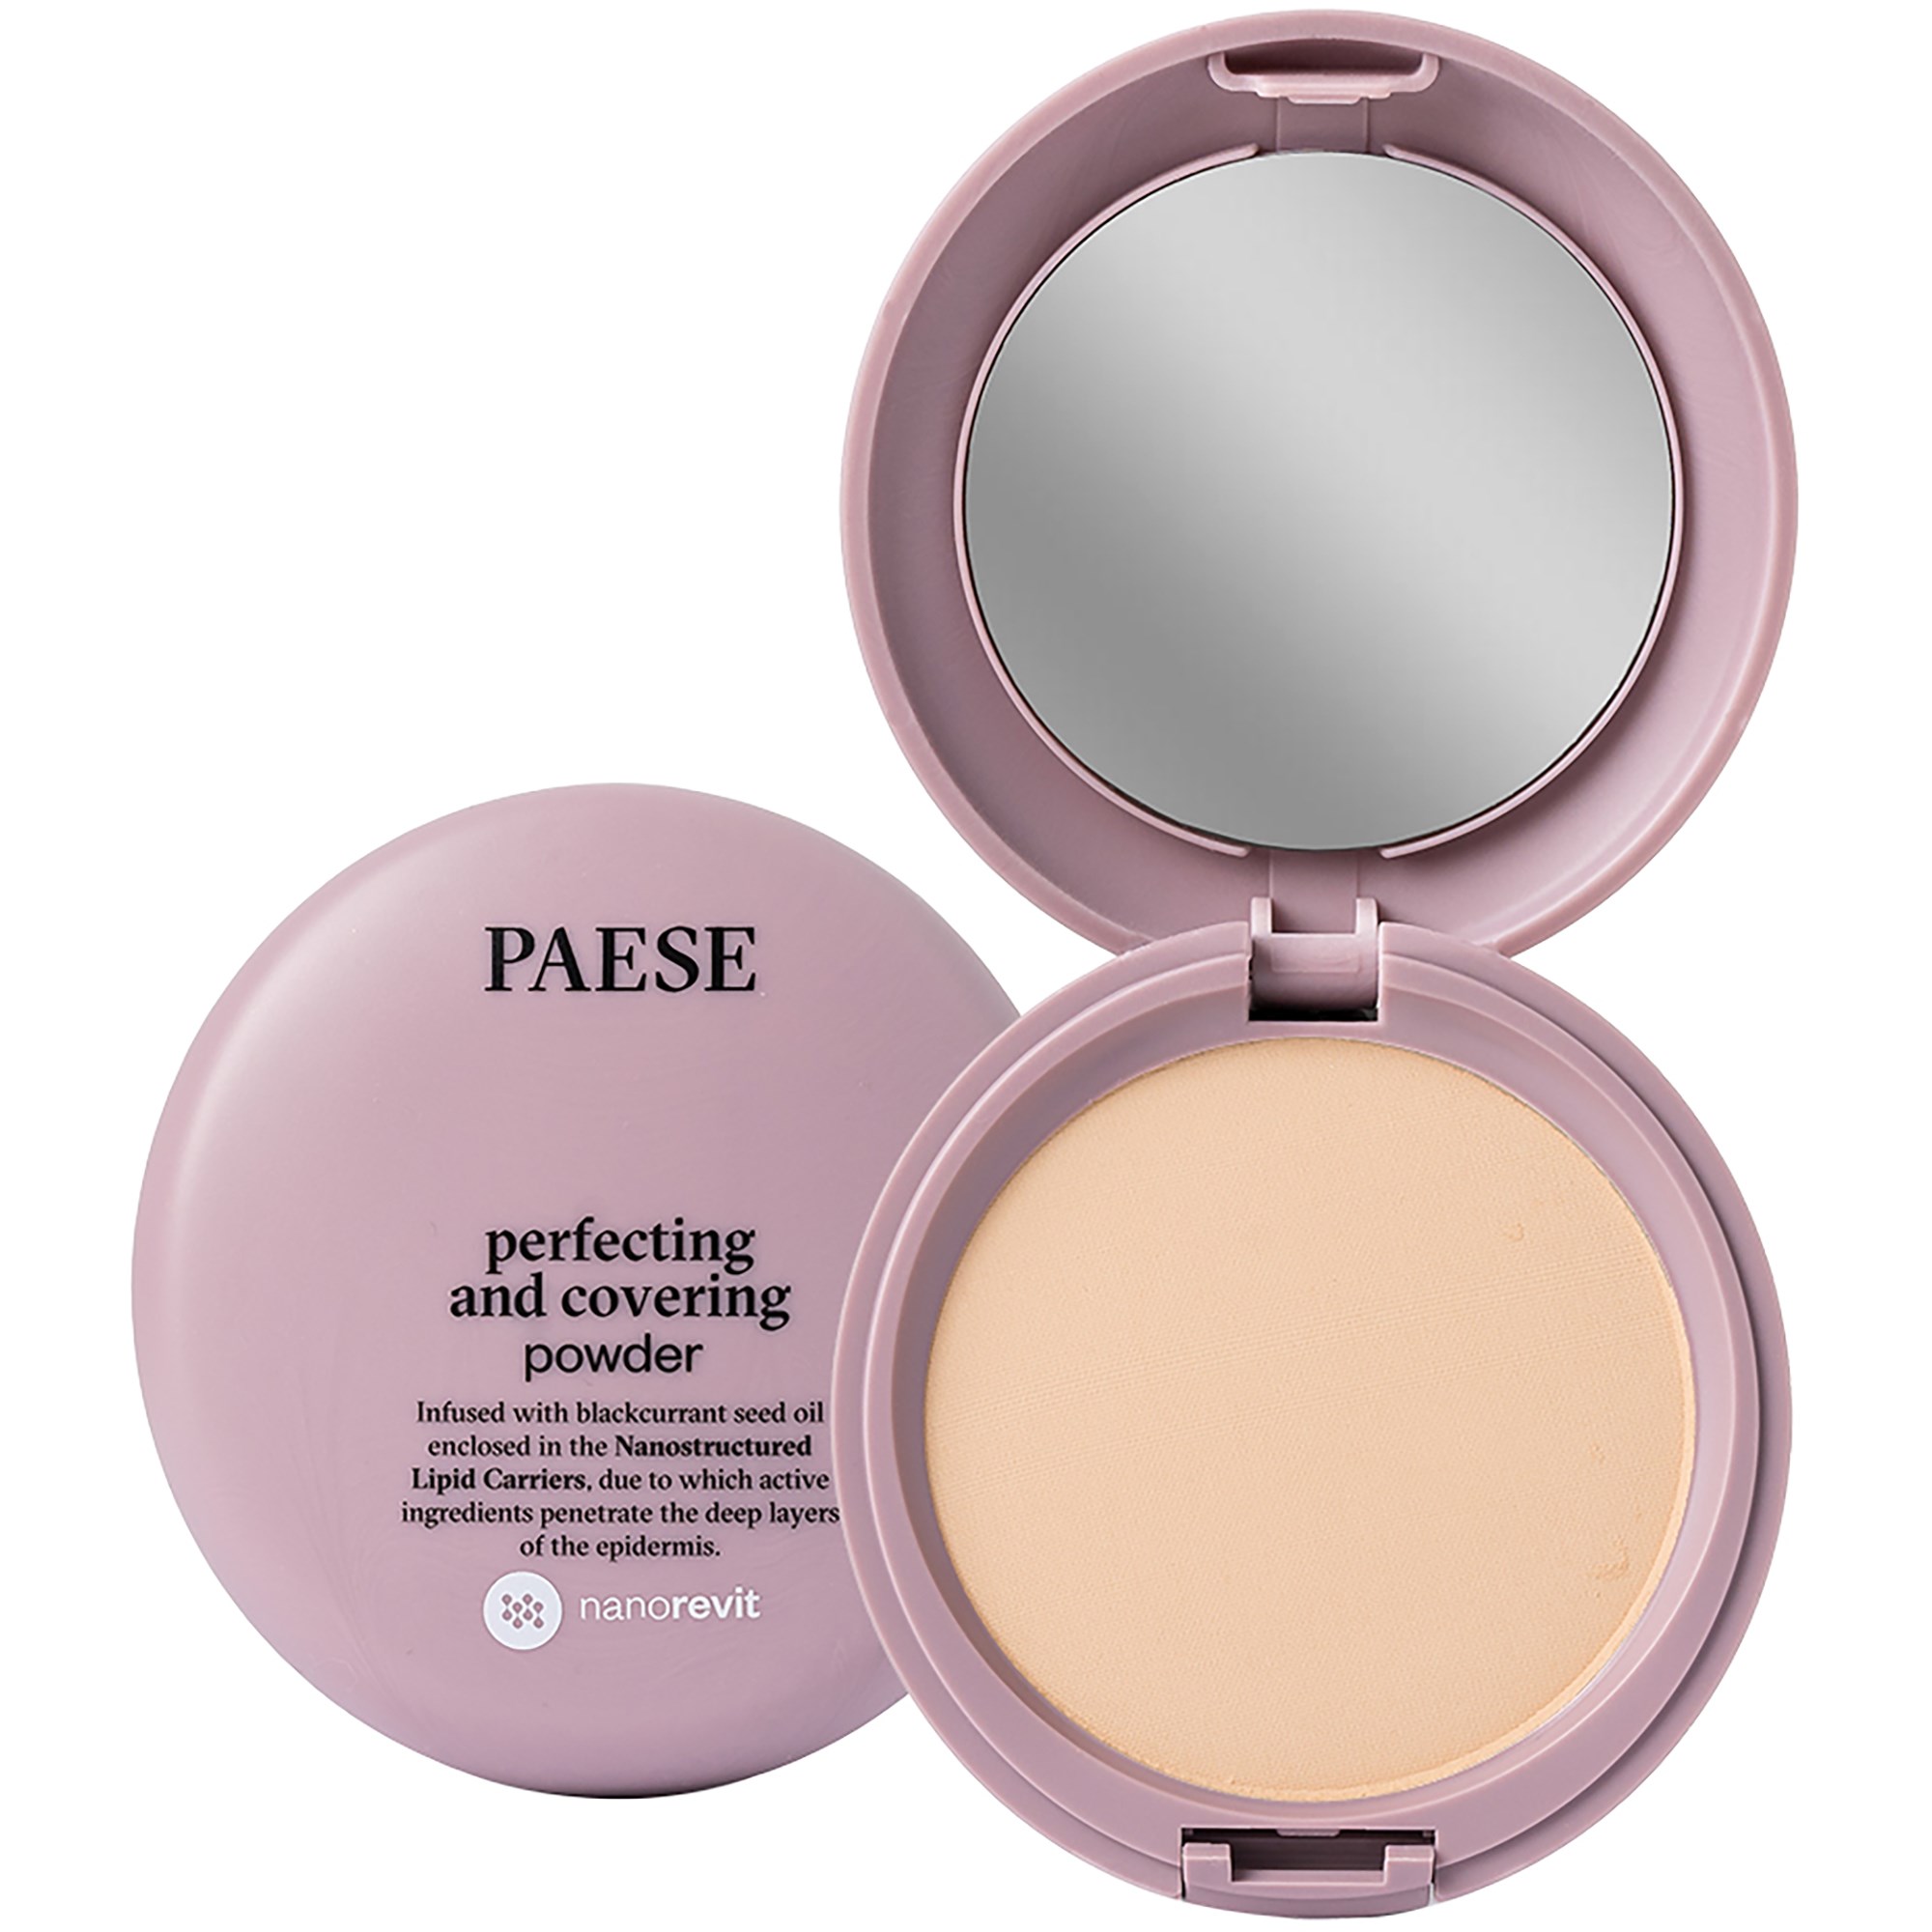 PAESE Perfecting and Covering Powder No 04 Warm Beige